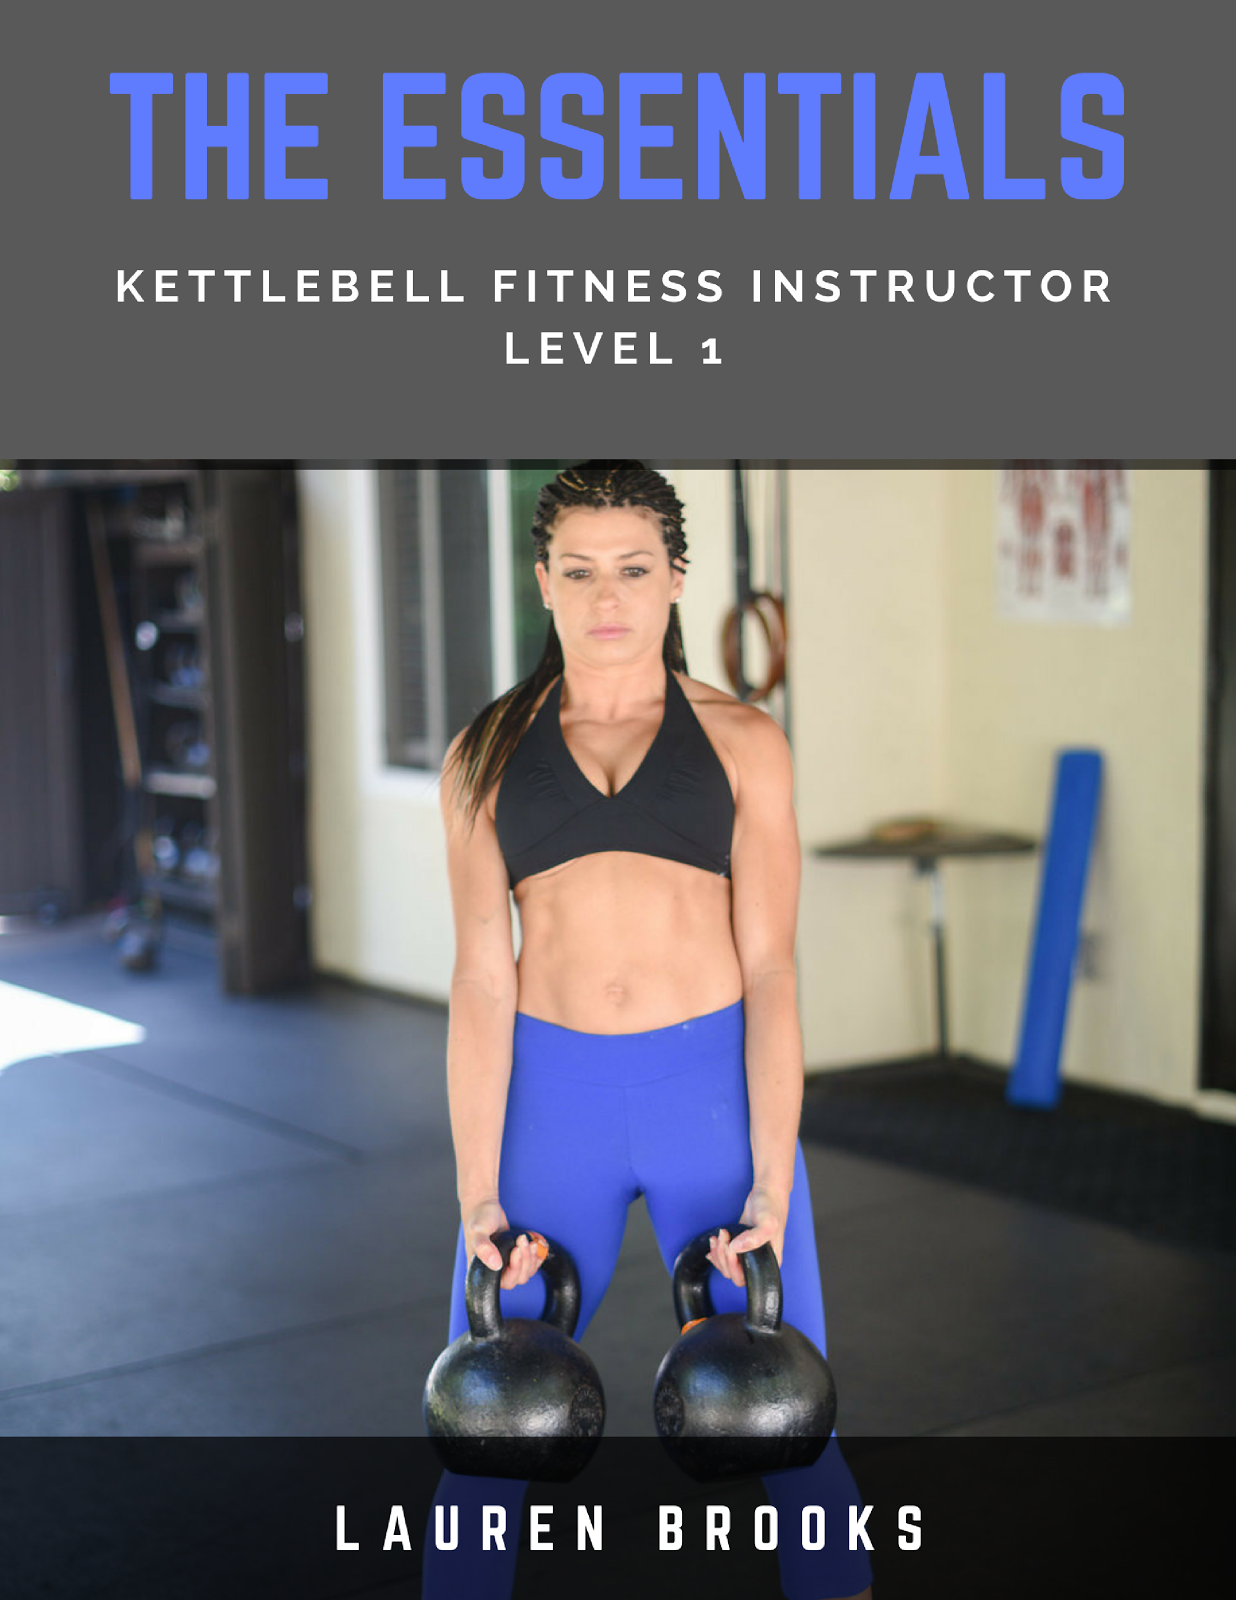 Essentials Kettlebell Workshop coming to you - Learn more - click on image